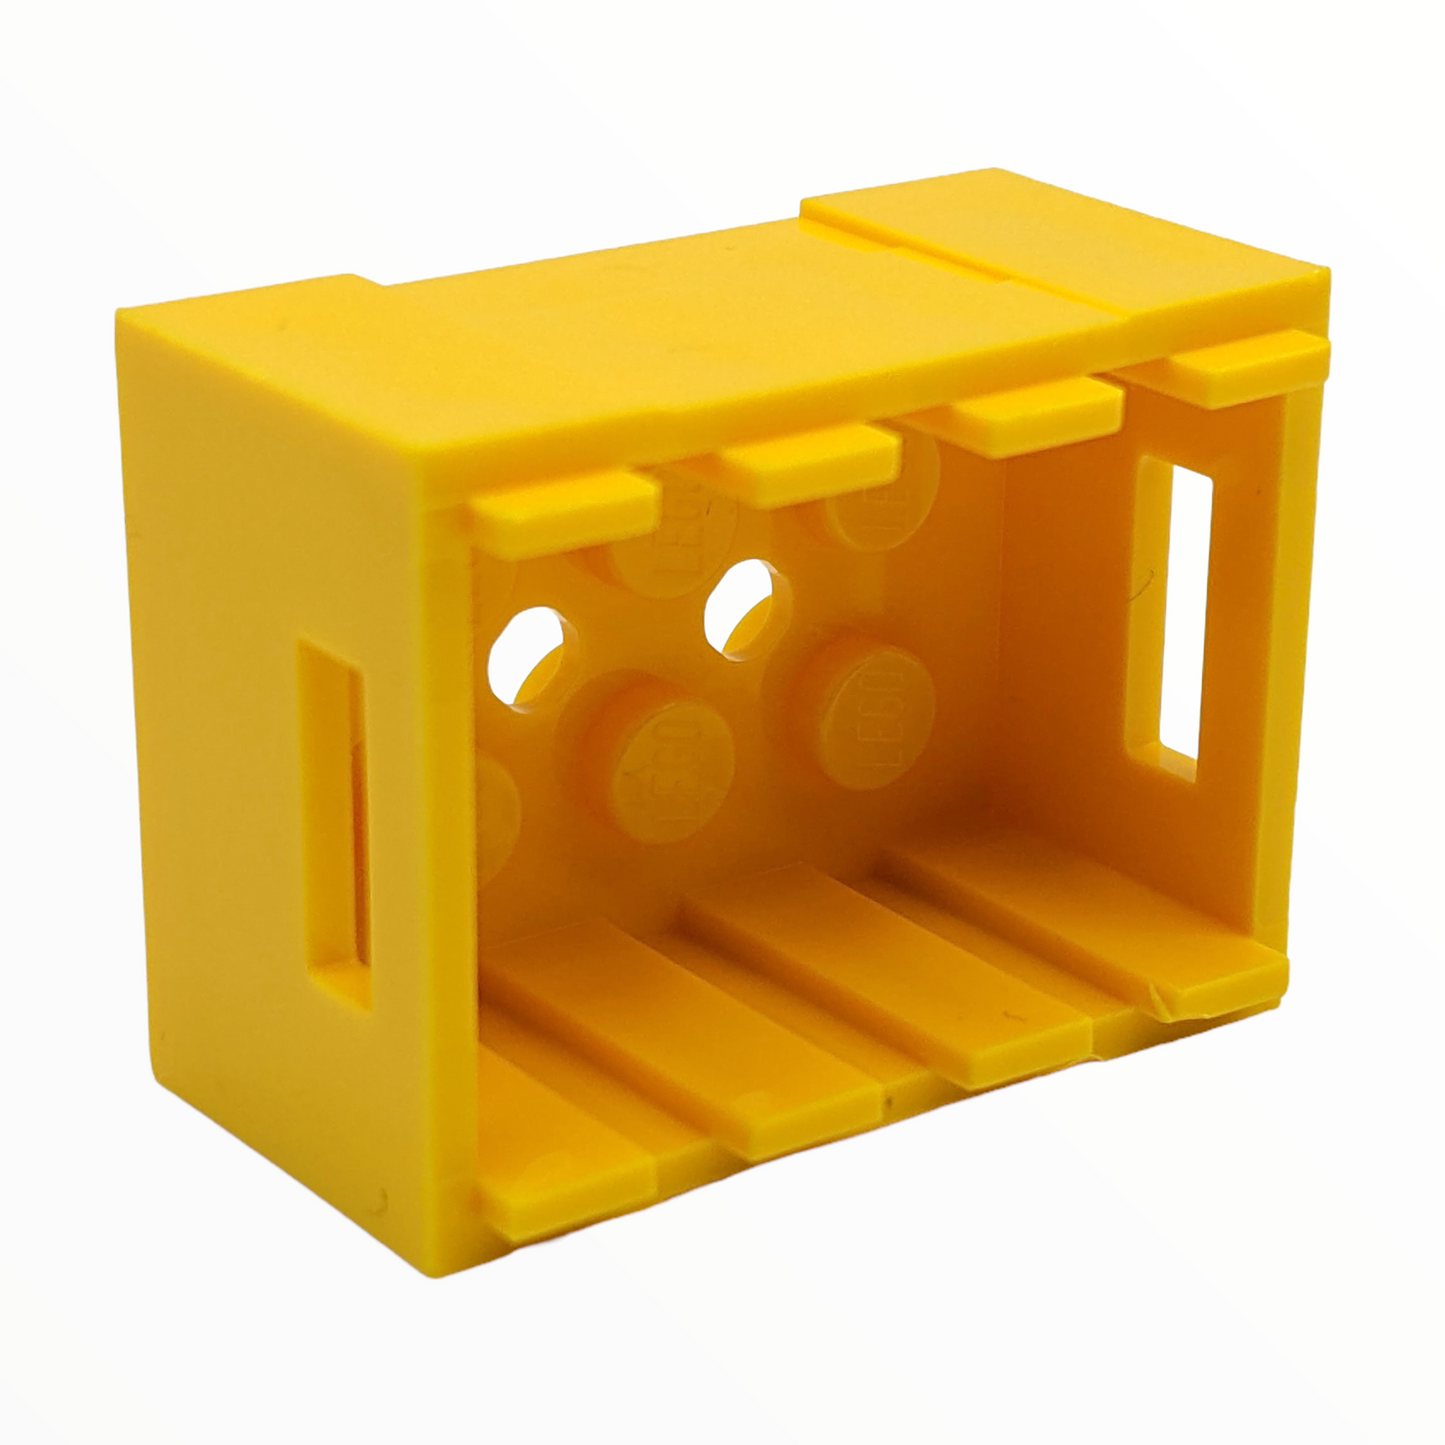 LEGO Container Crate 3x4x1 2/3 in Yellow